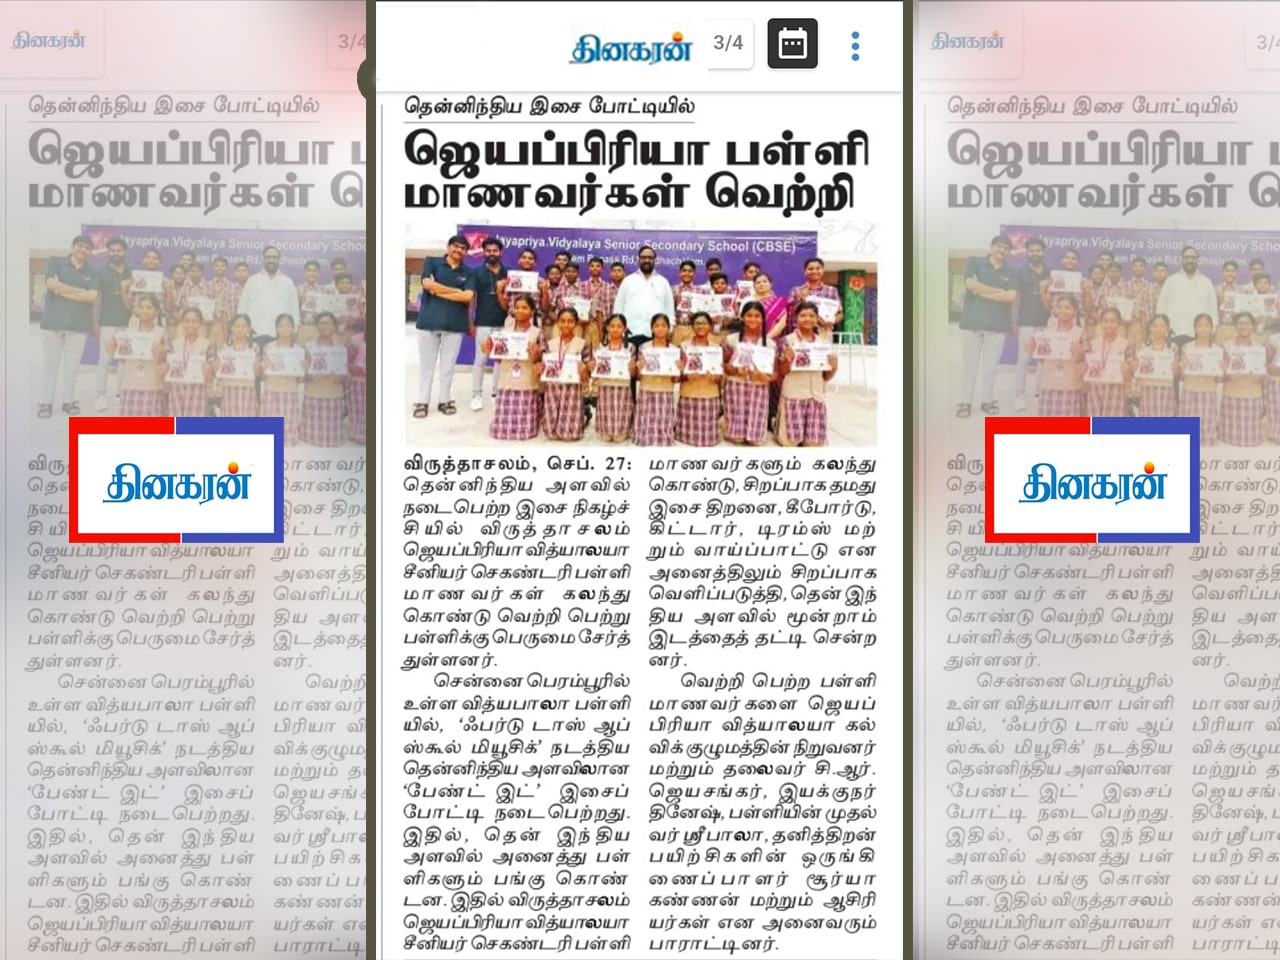 Congratulations! JPV Students have won third place in the South Indian level music competition.